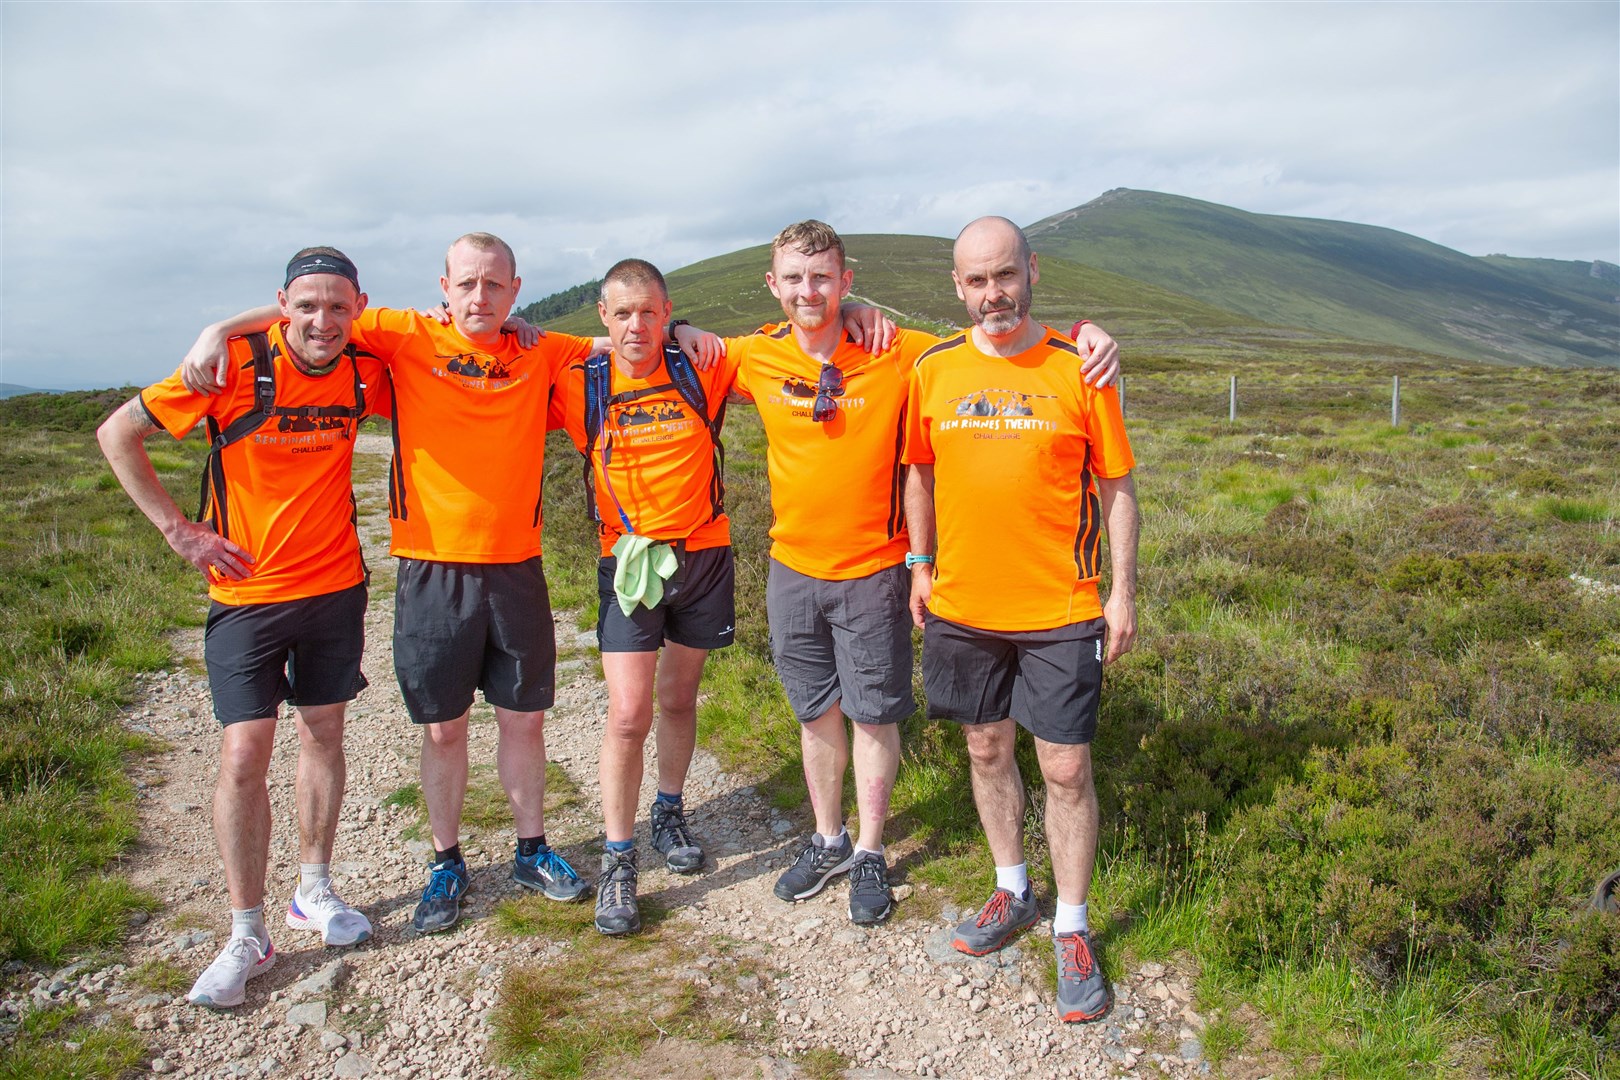 The fab five at the start of their challenge on Saturday morning. Picture: Daniel Forsyth. Image No.044325.